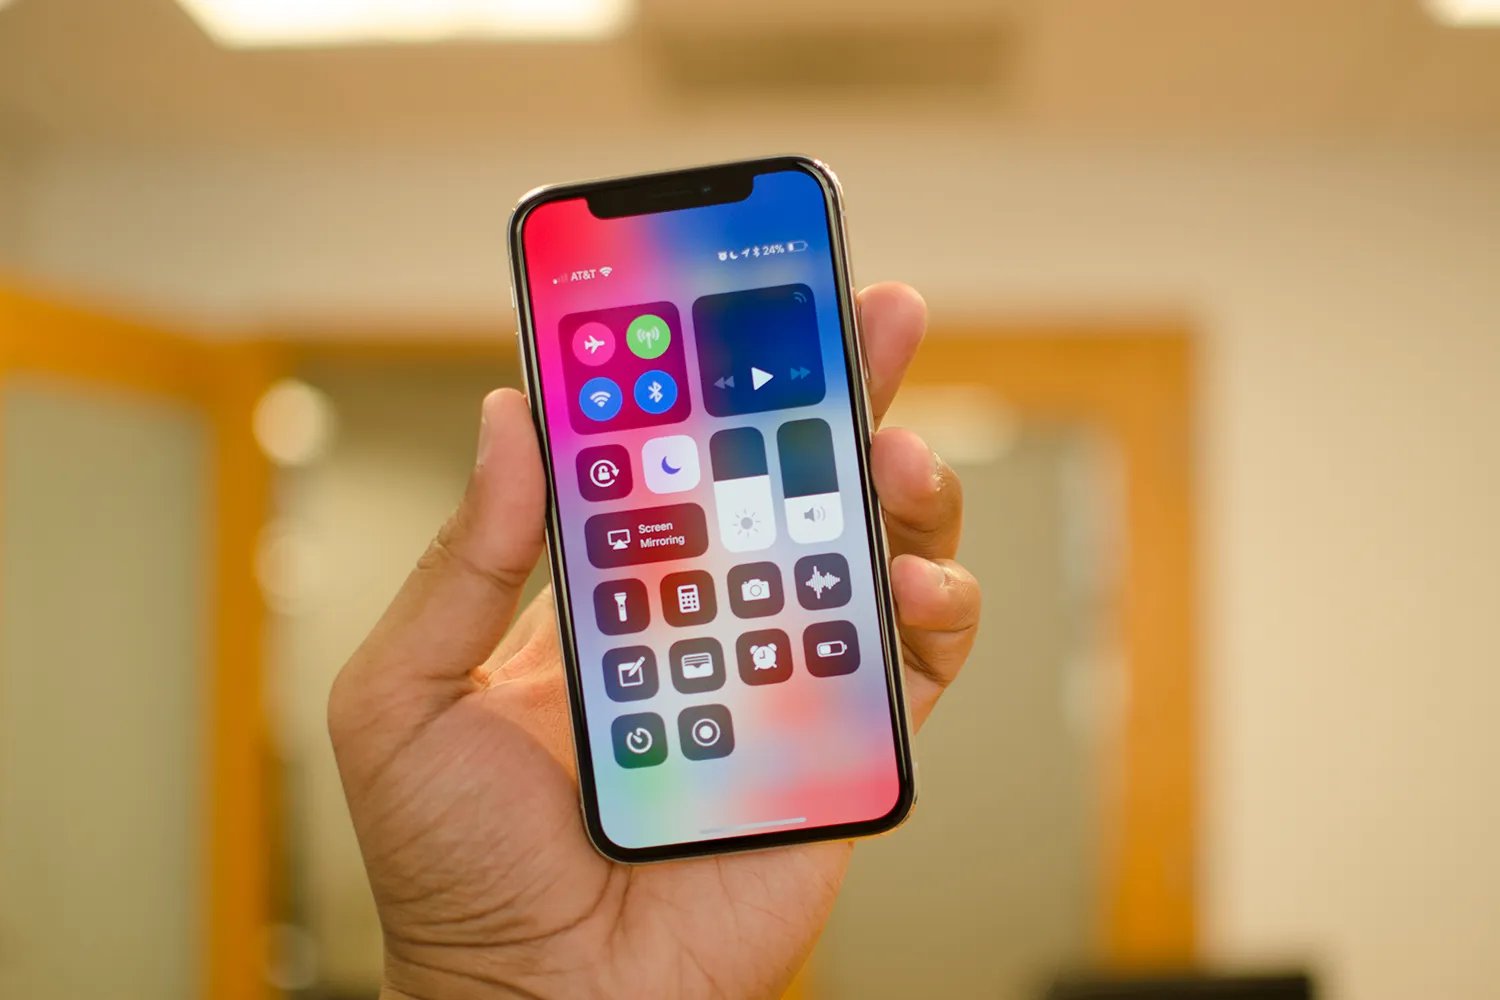 youtube-adds-hdr-support-for-iphone-xs-and-xs-max